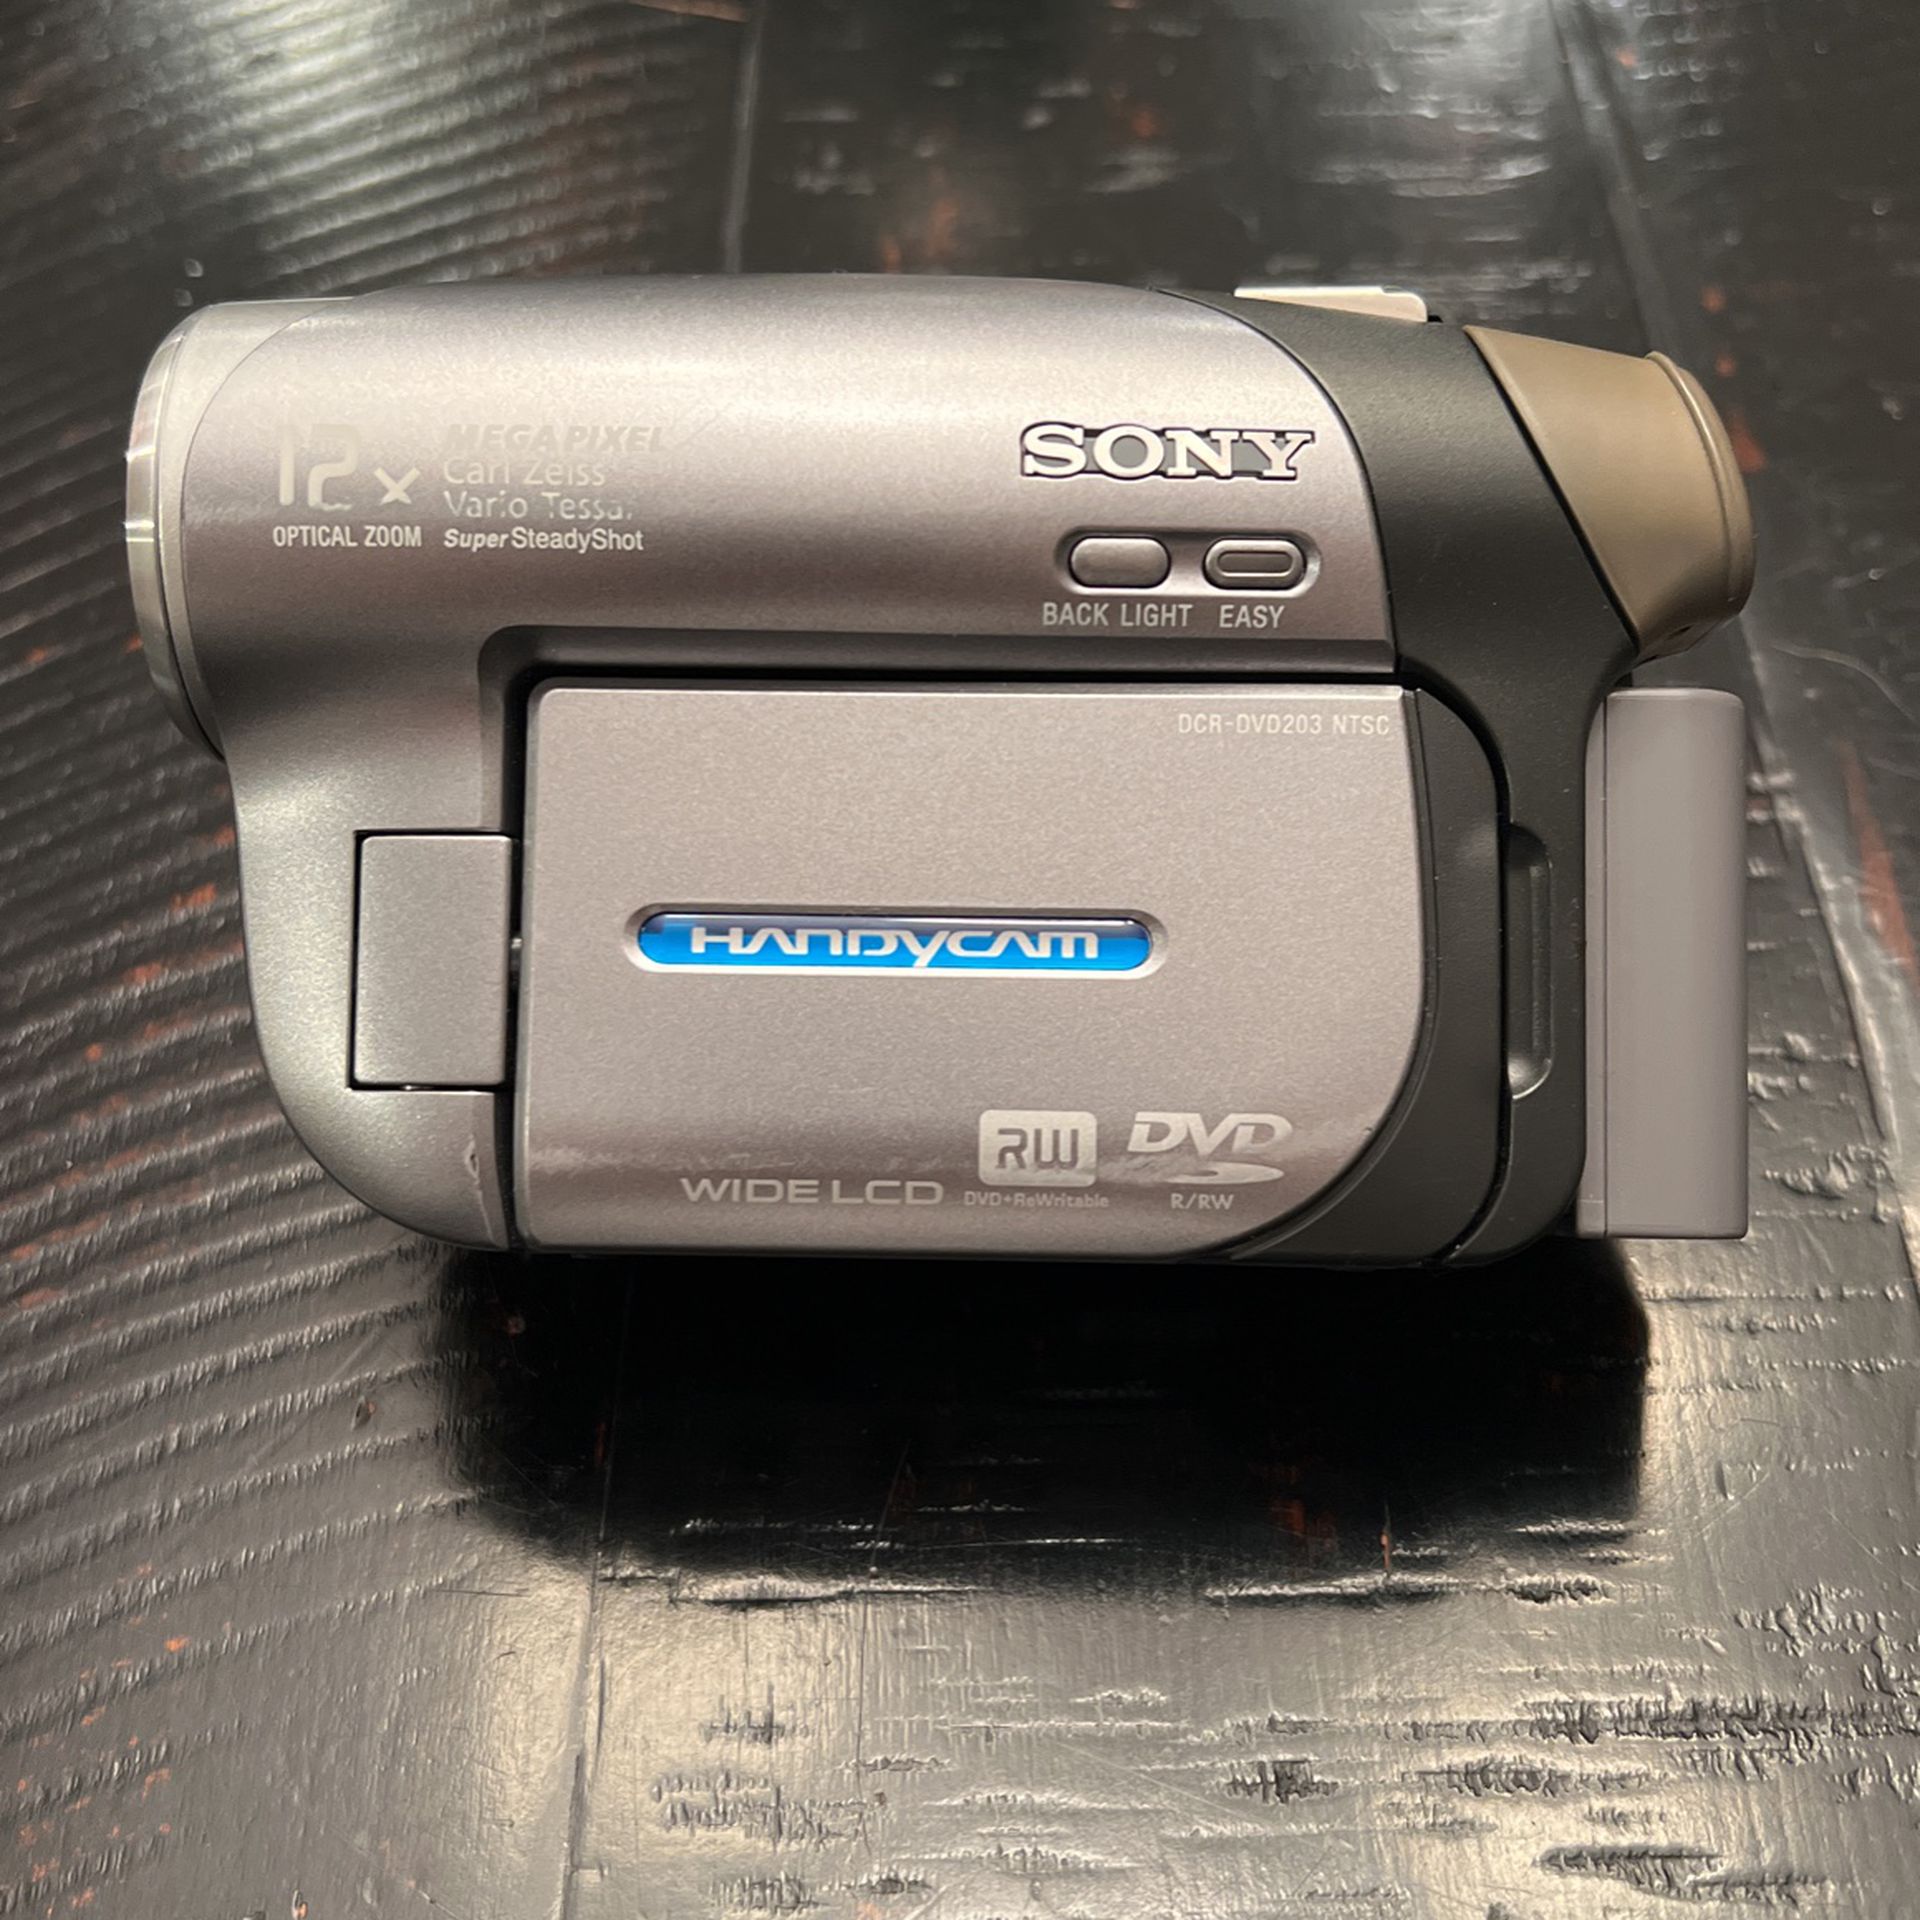 Sony HandyCam DCR-DVD203 Mini DVD Camcorder Nightshot 12x Optical Zoom for Sale West Islip, NY OfferUp